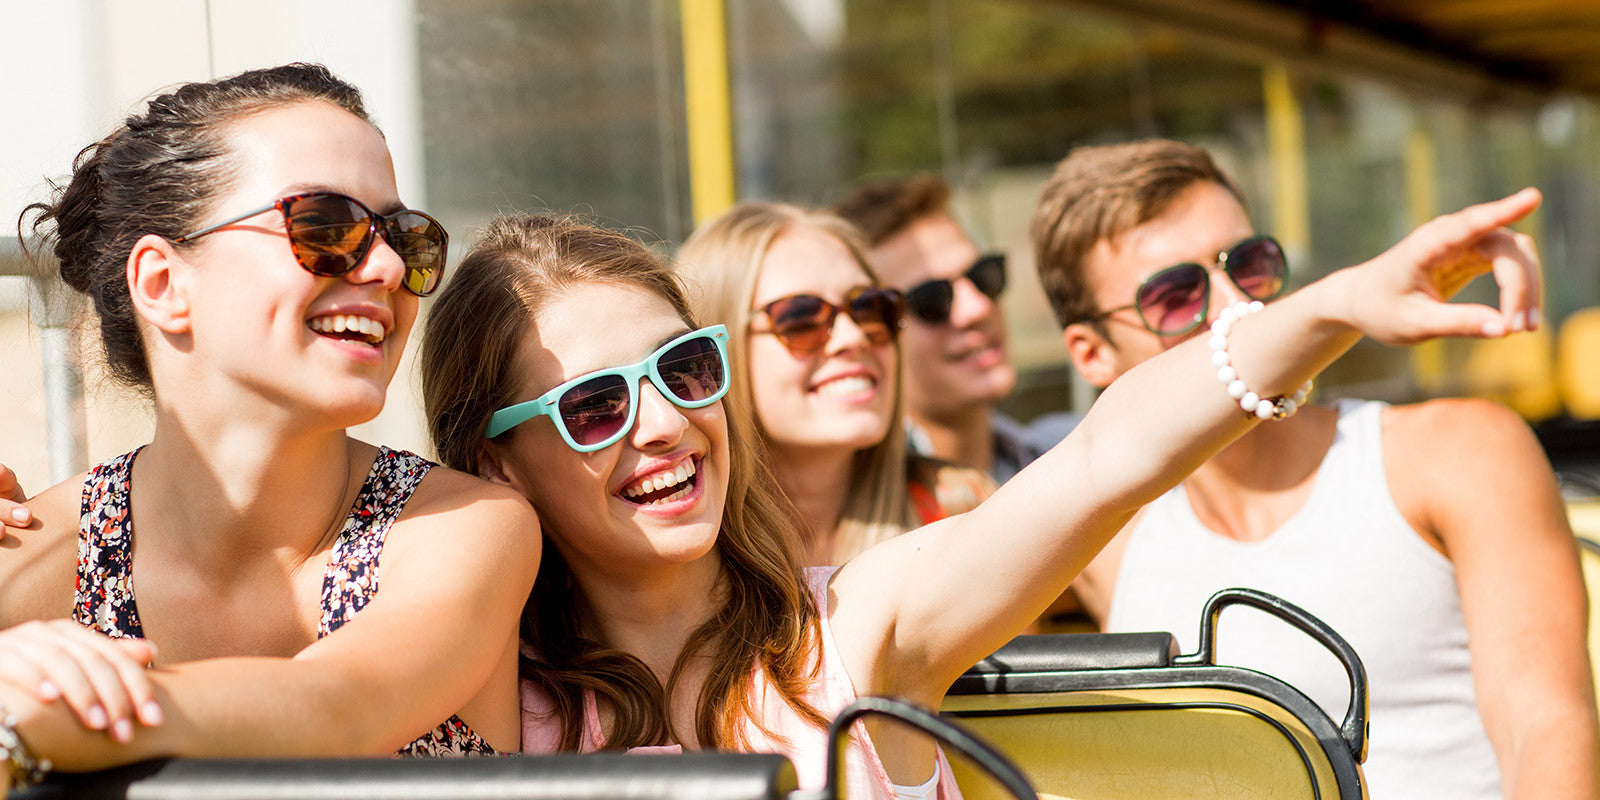 Casual wear & cool shades makes the trip memorable!